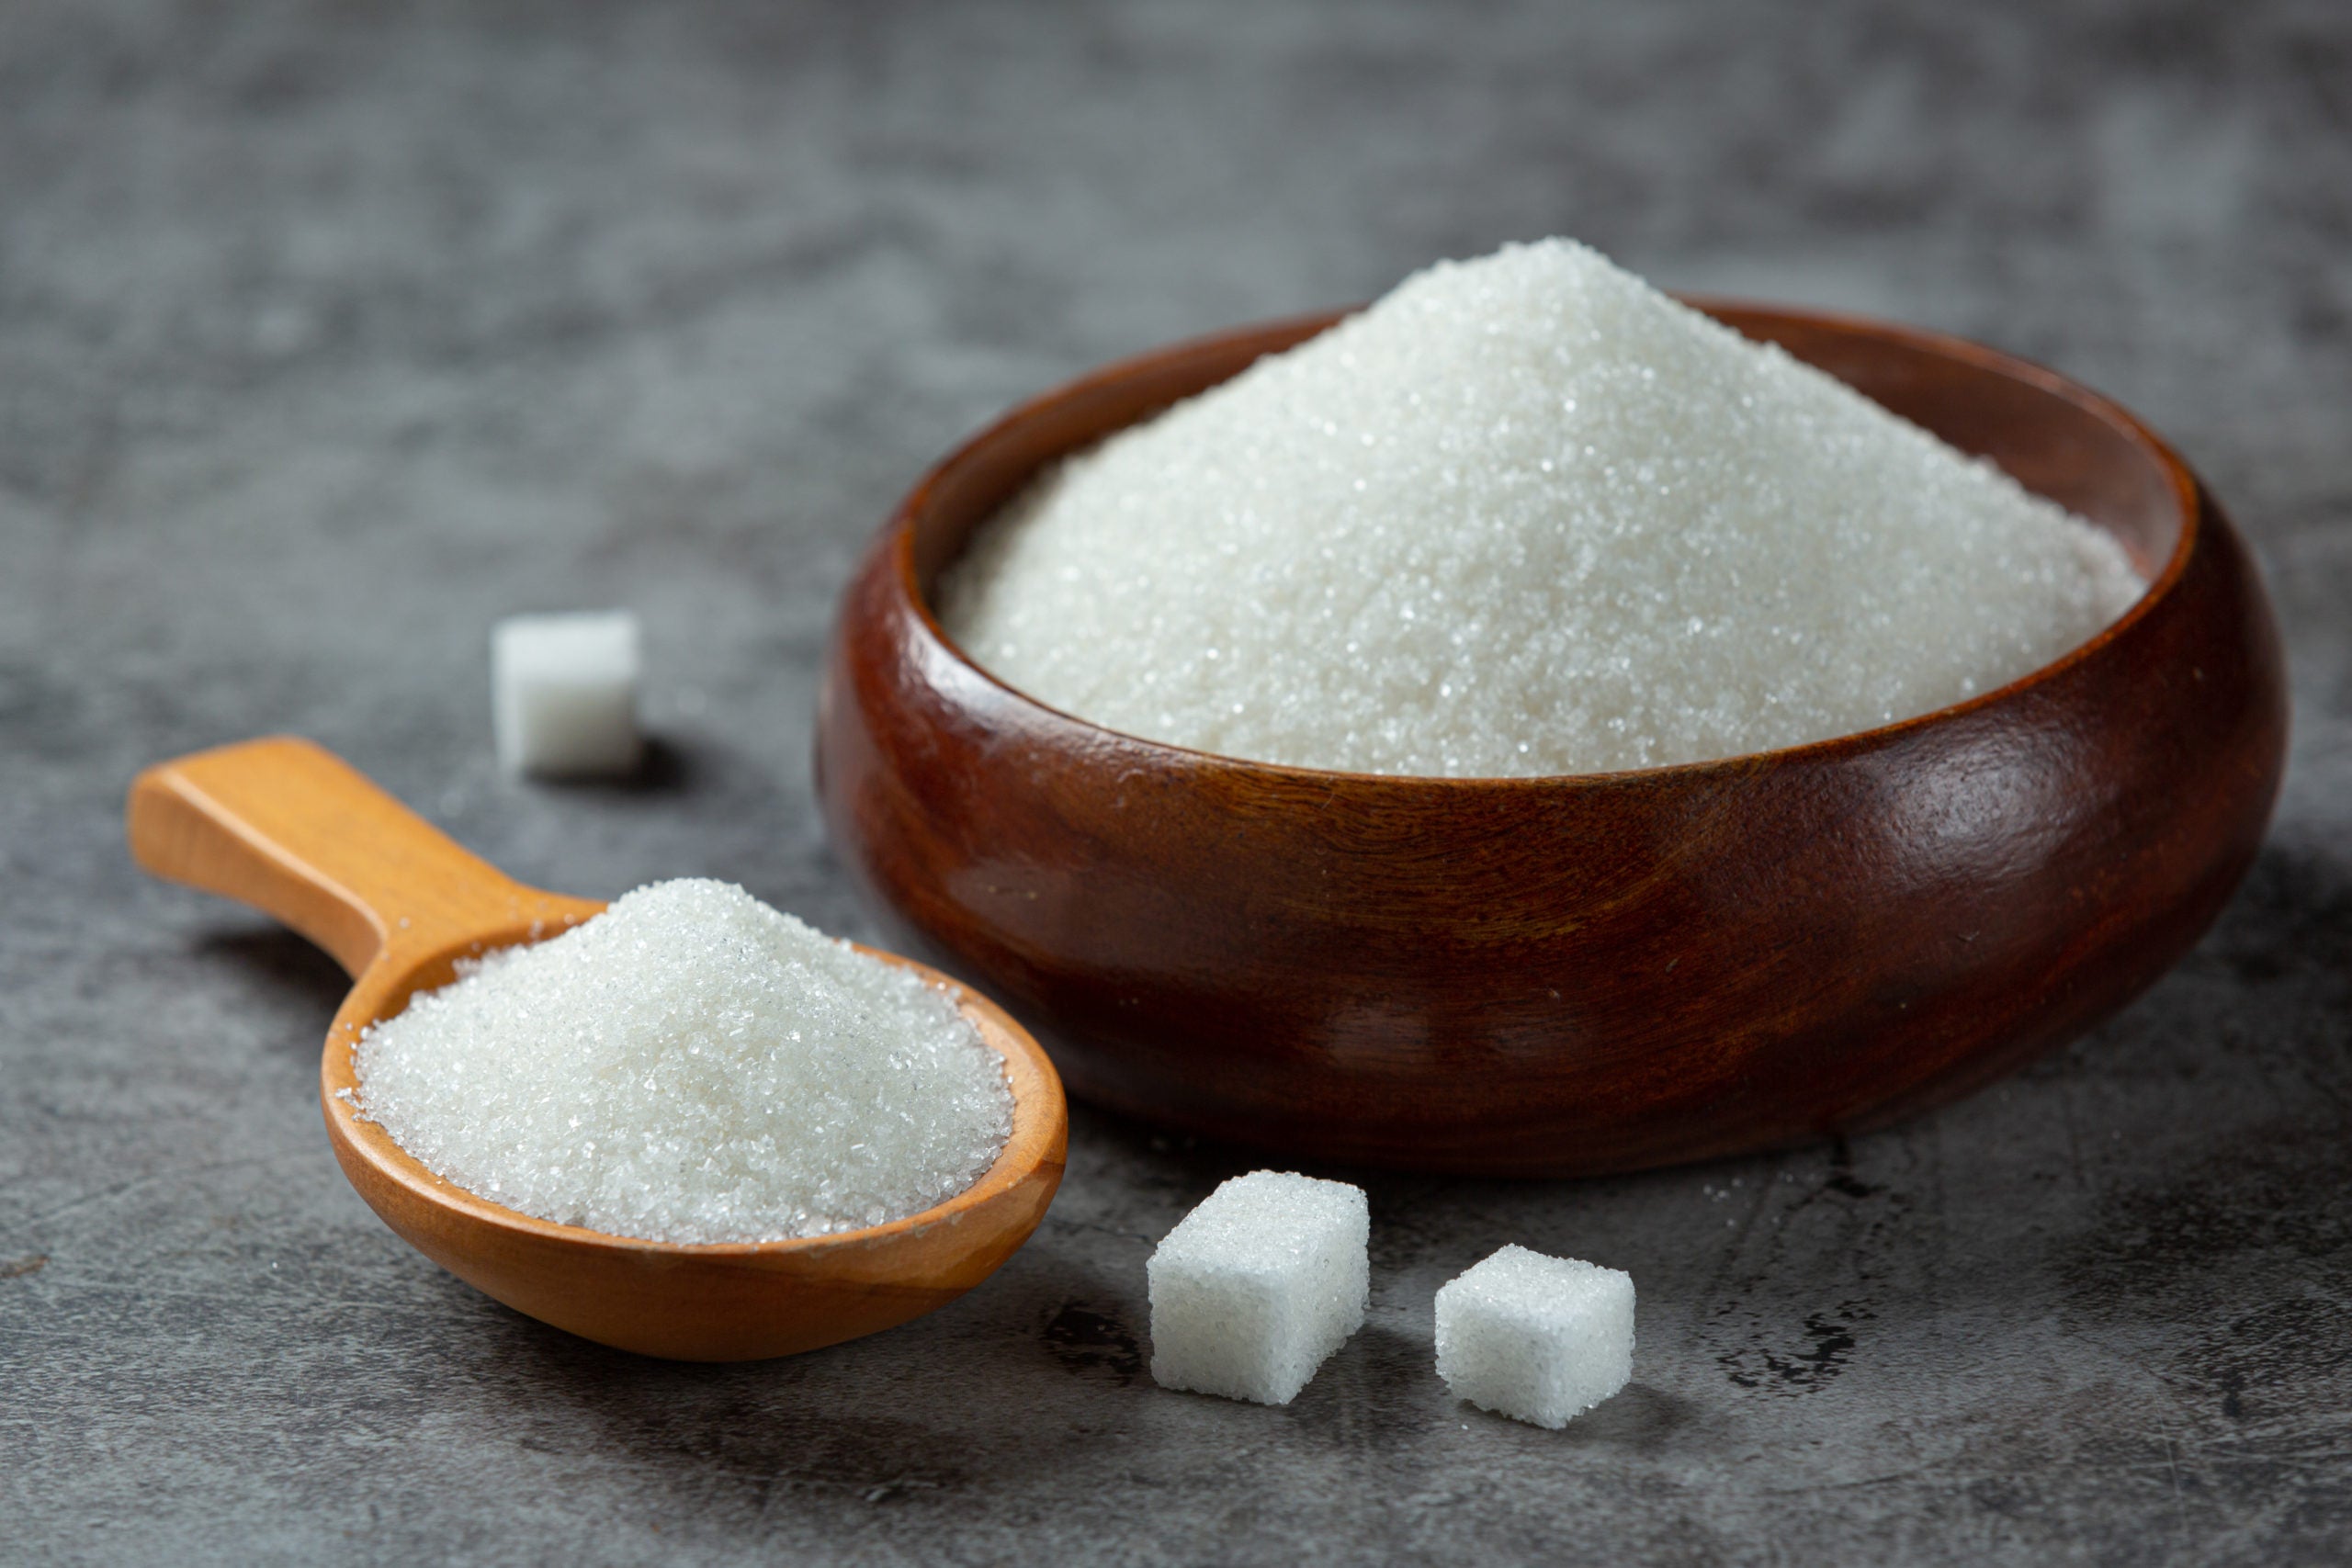 The 5 body organs your sugar consumption could be damaging.